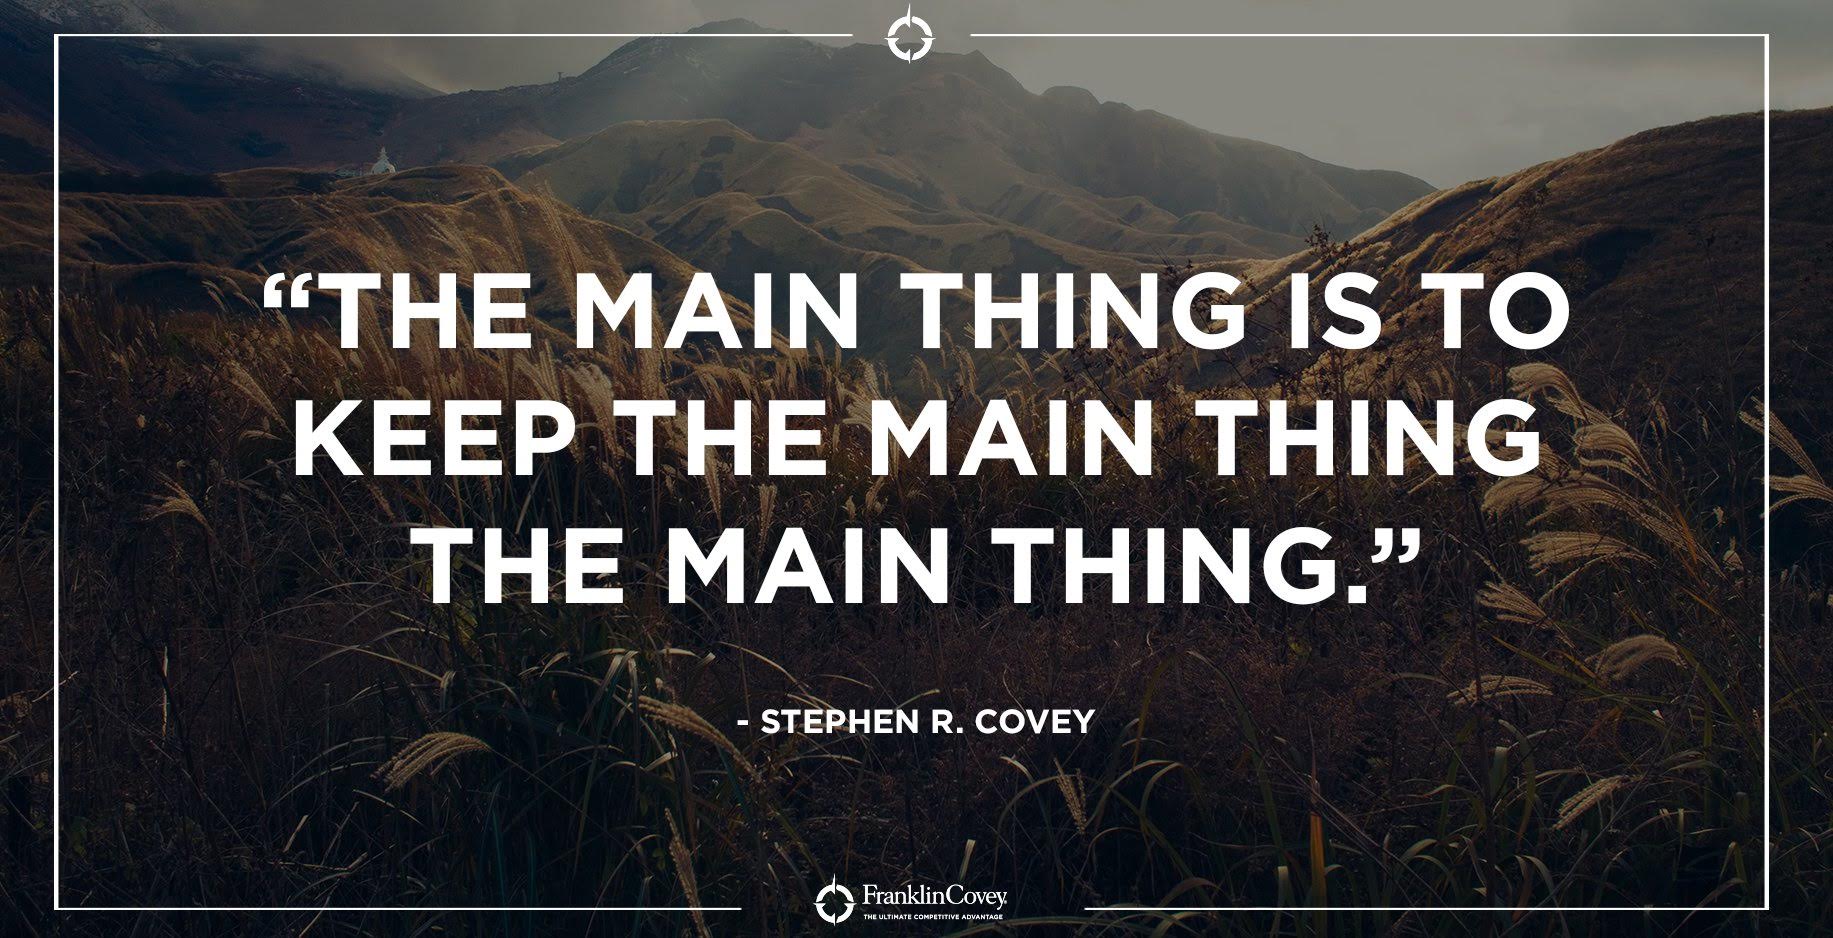 Source: Stephen R. Covey Twitter feed